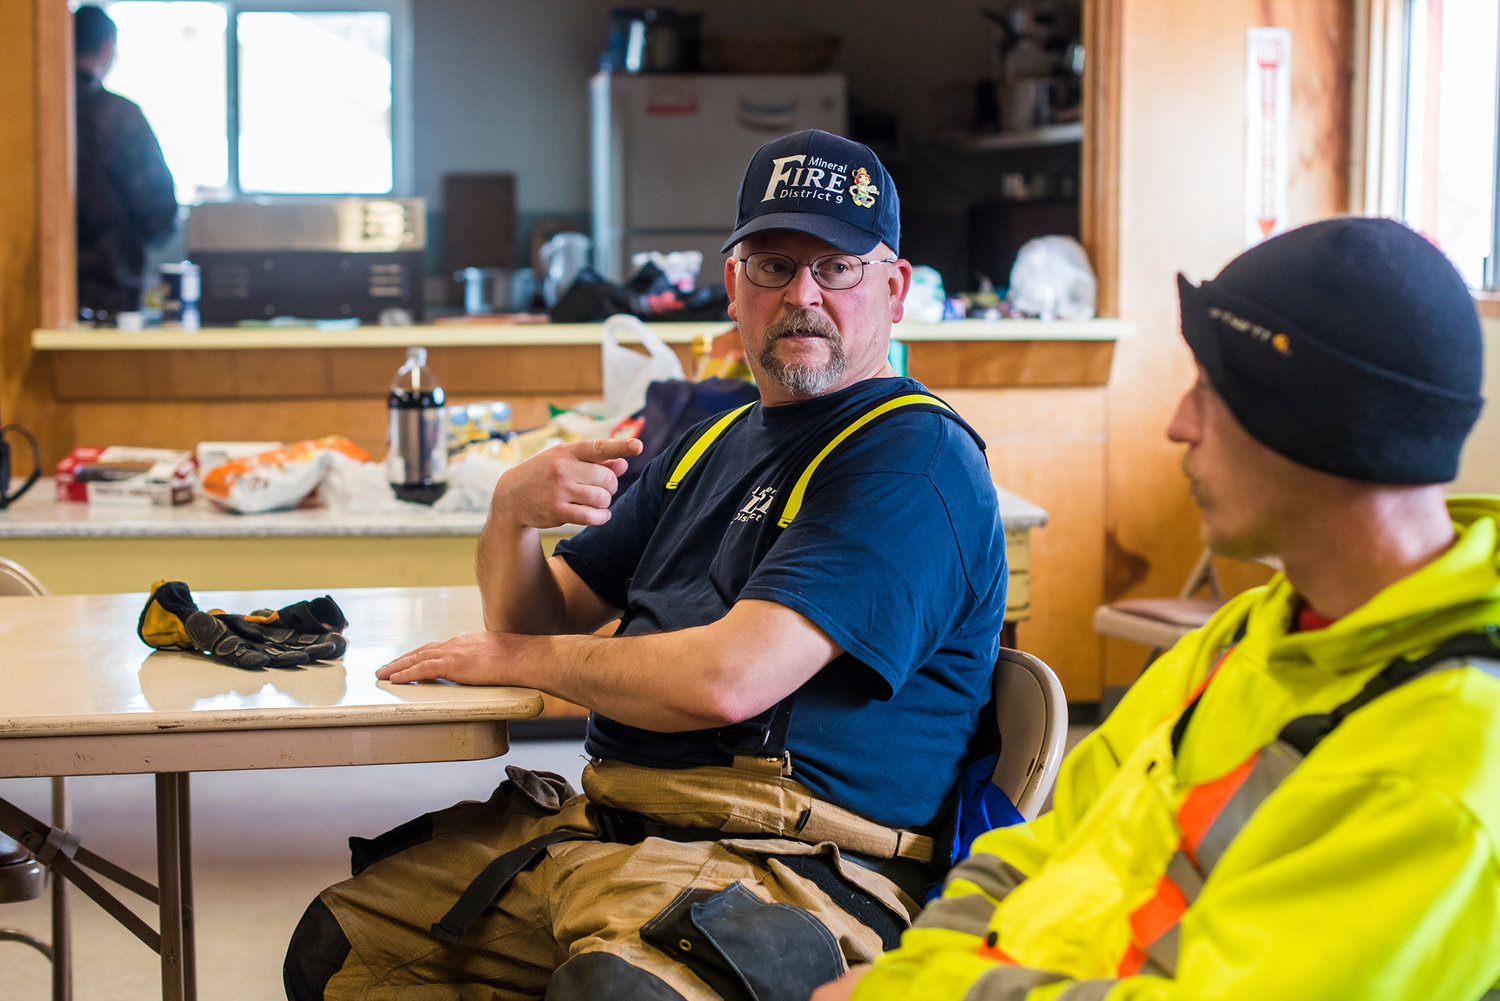 Lieutenant Terry Boyet talks about the departments efforts following the widespread snowstorm that swept through Mineral, Wednesday afternoon in Mineral.